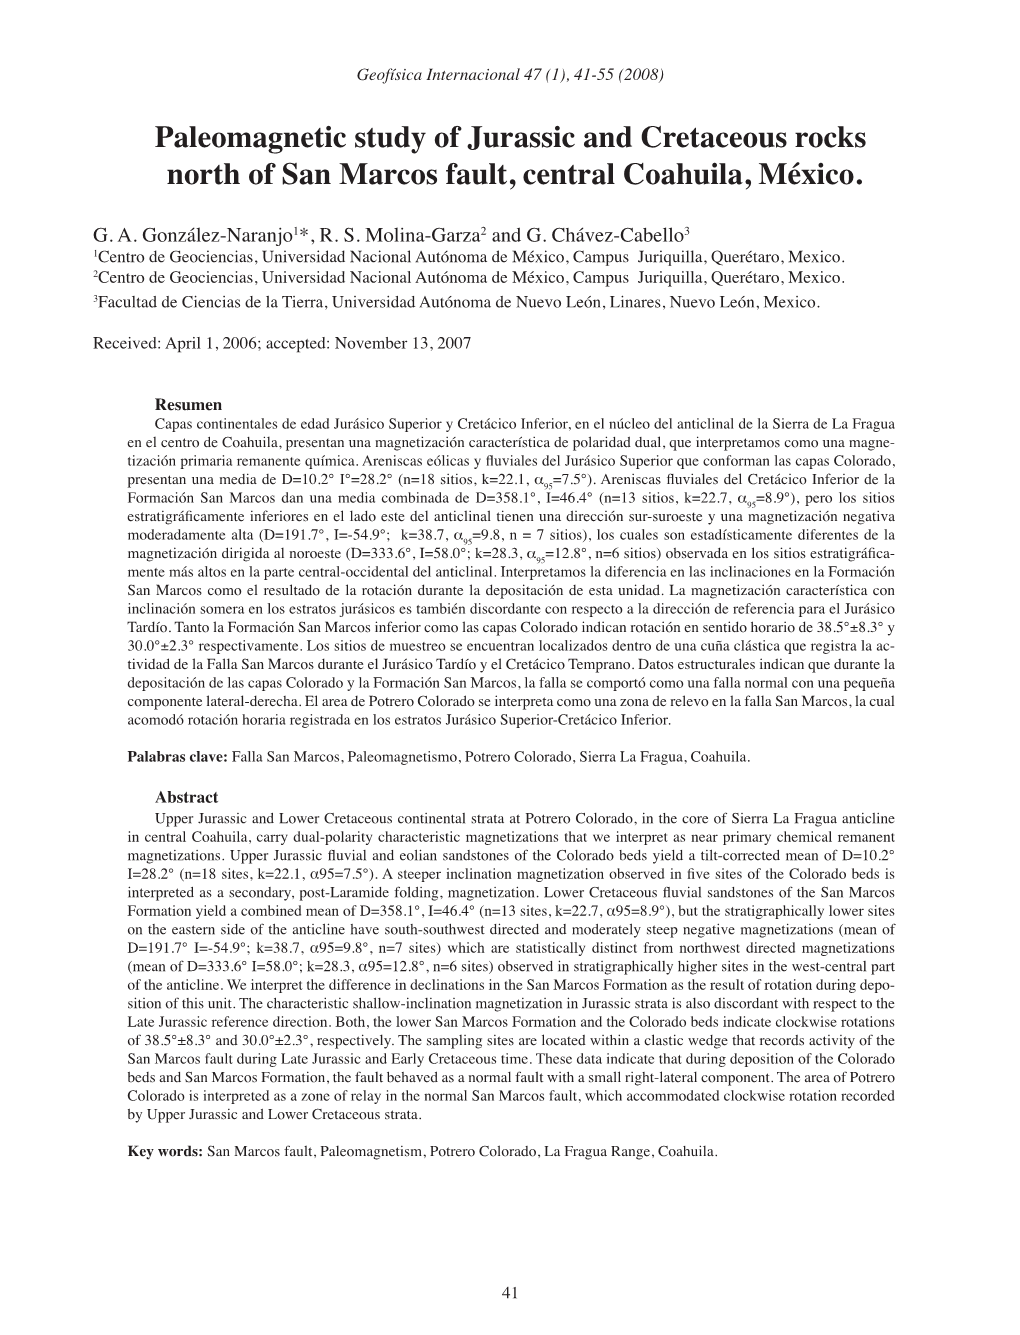 Paleomagnetic Study of Jurassic and Cretaceous Rocks North of San Marcos Fault, Central Coahuila, México